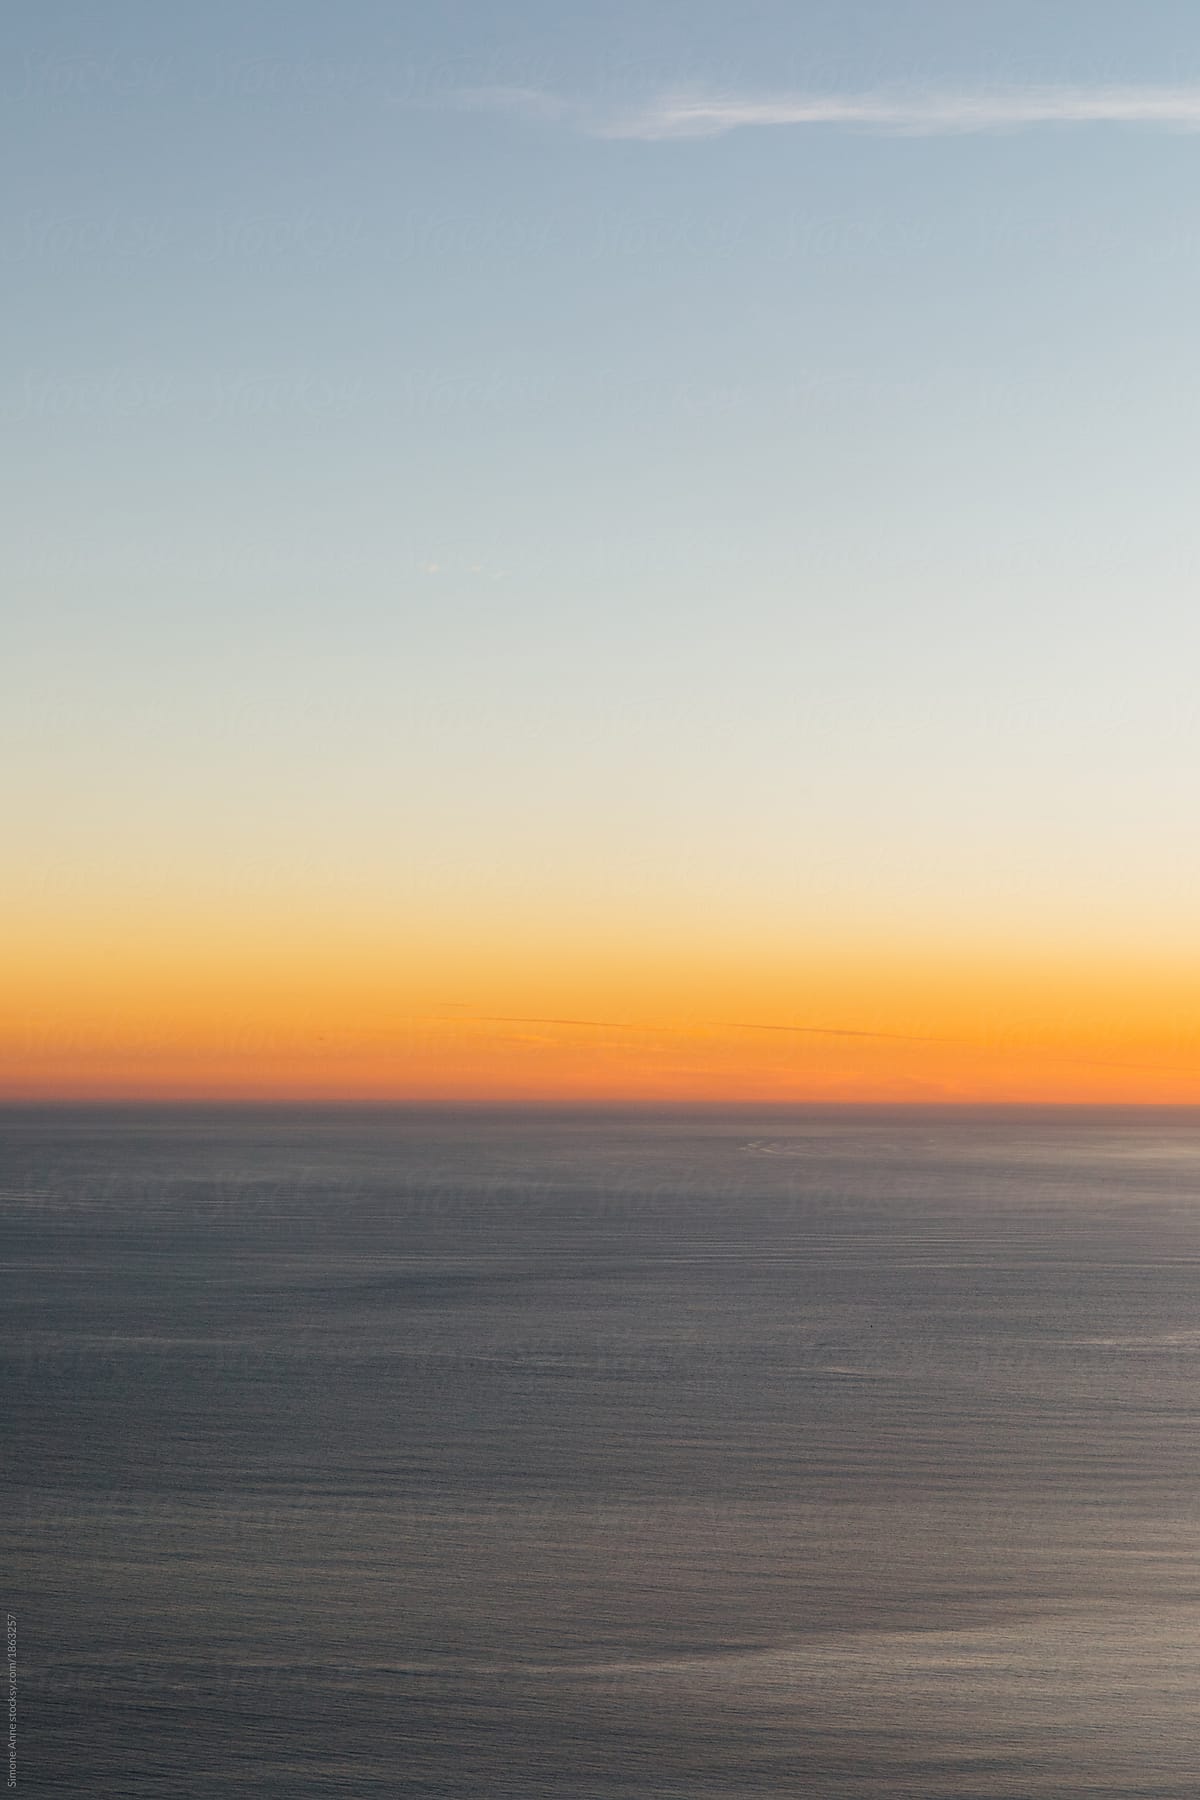 Sunset over the Pacific Ocean in California